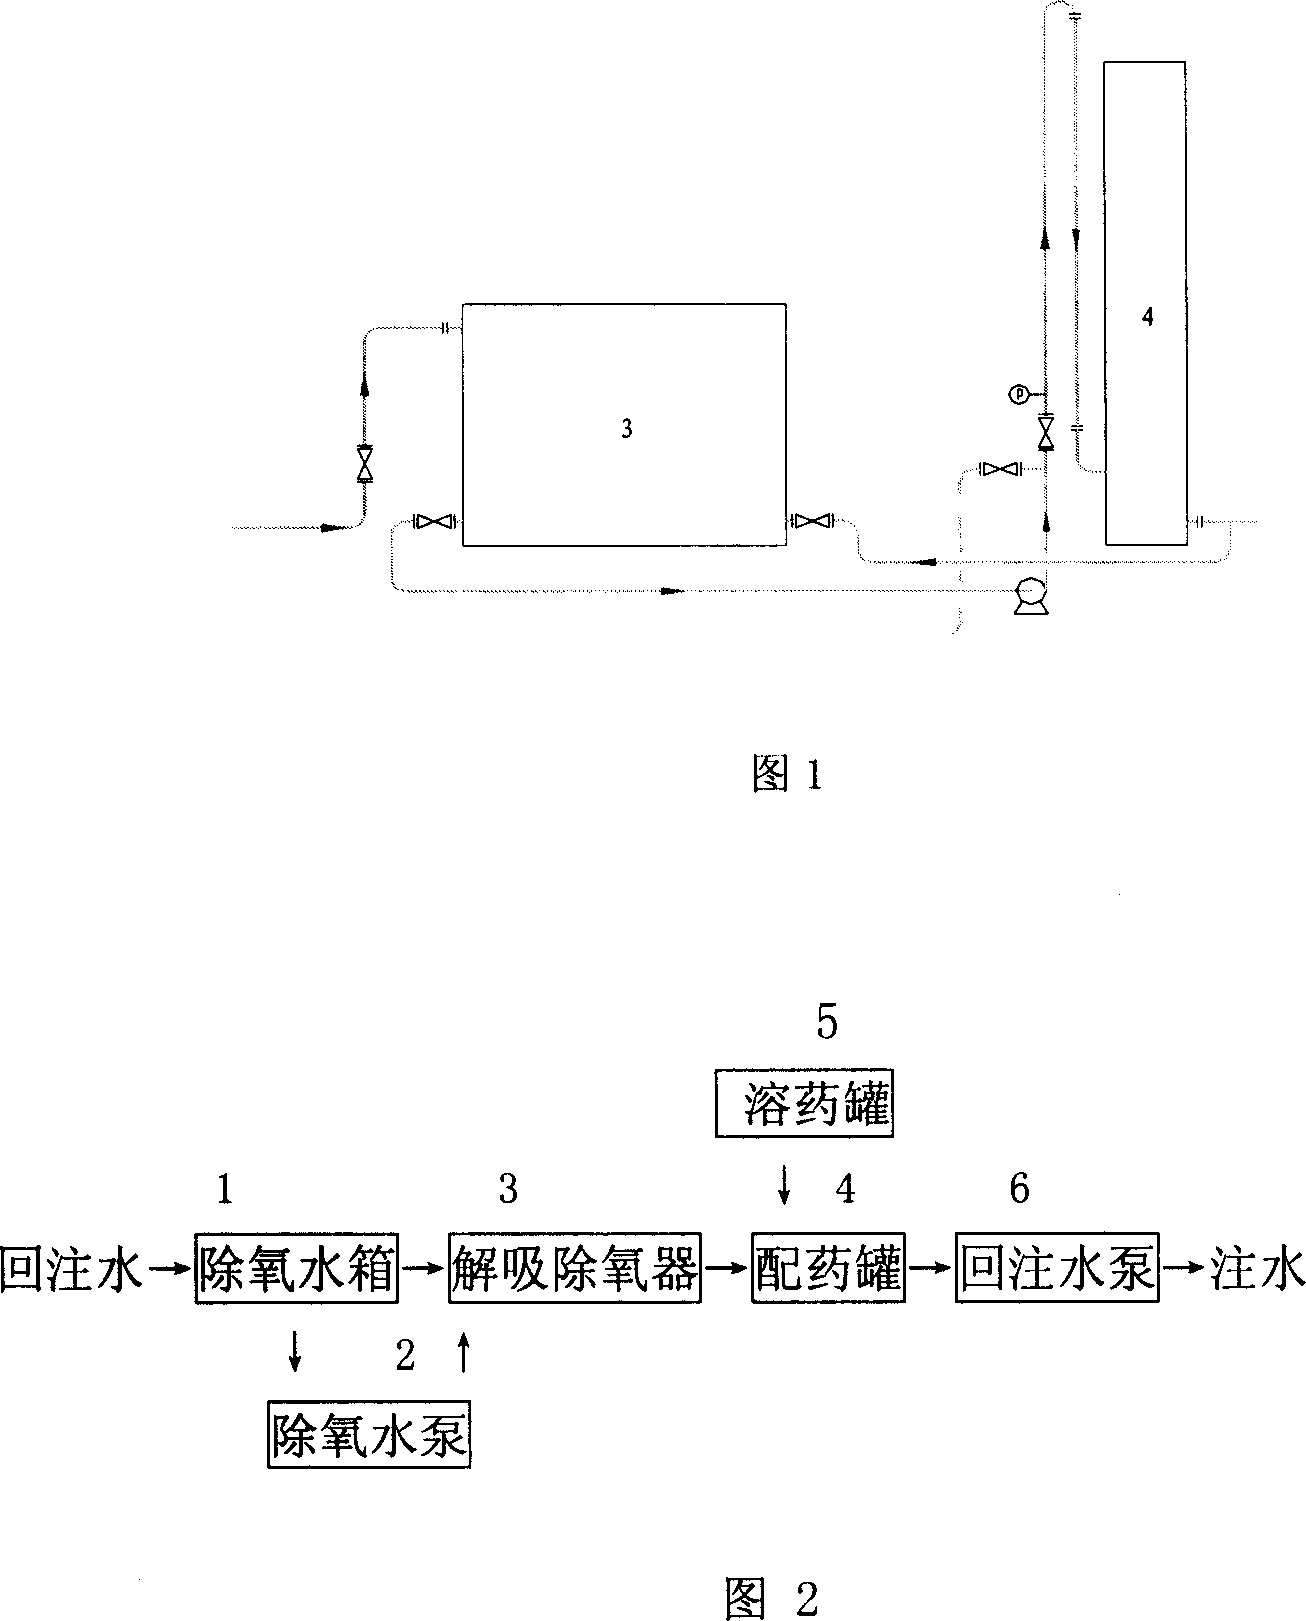 Re-injection method for produced-water desorption oxygen-removal mixing polymer for improving petroleum recovery efficiency